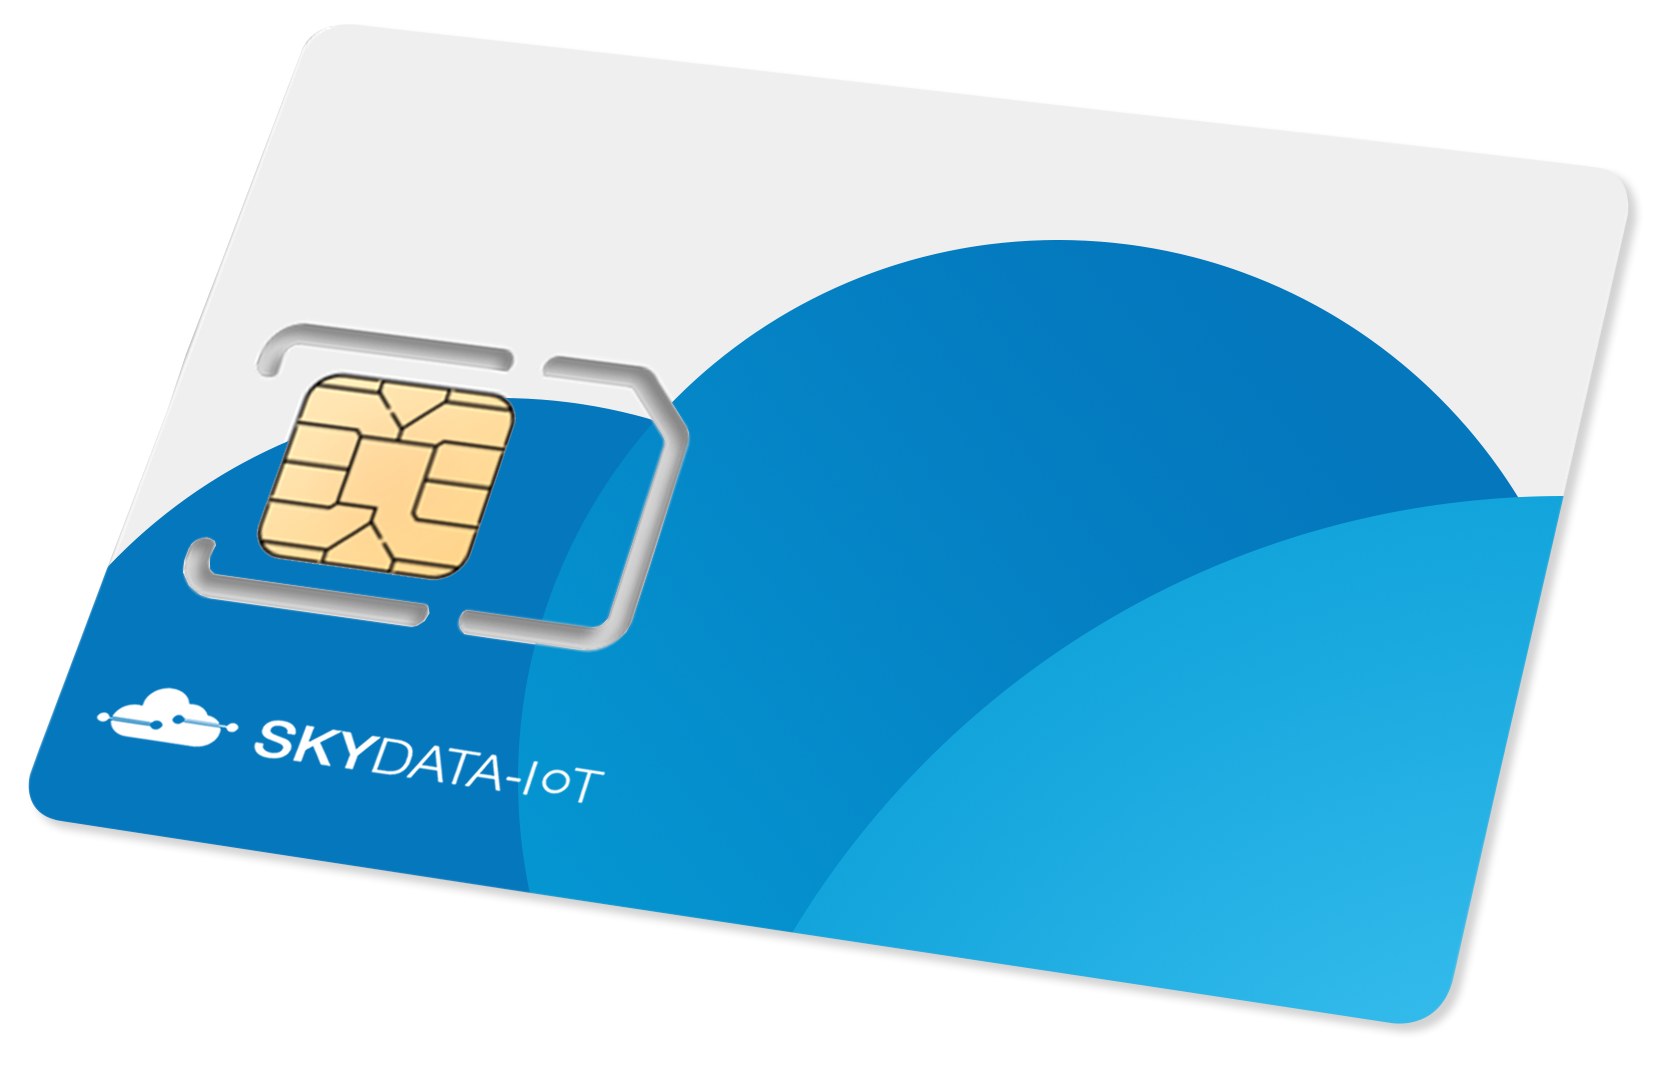 a blue and white skydata-iot card with a chip on it